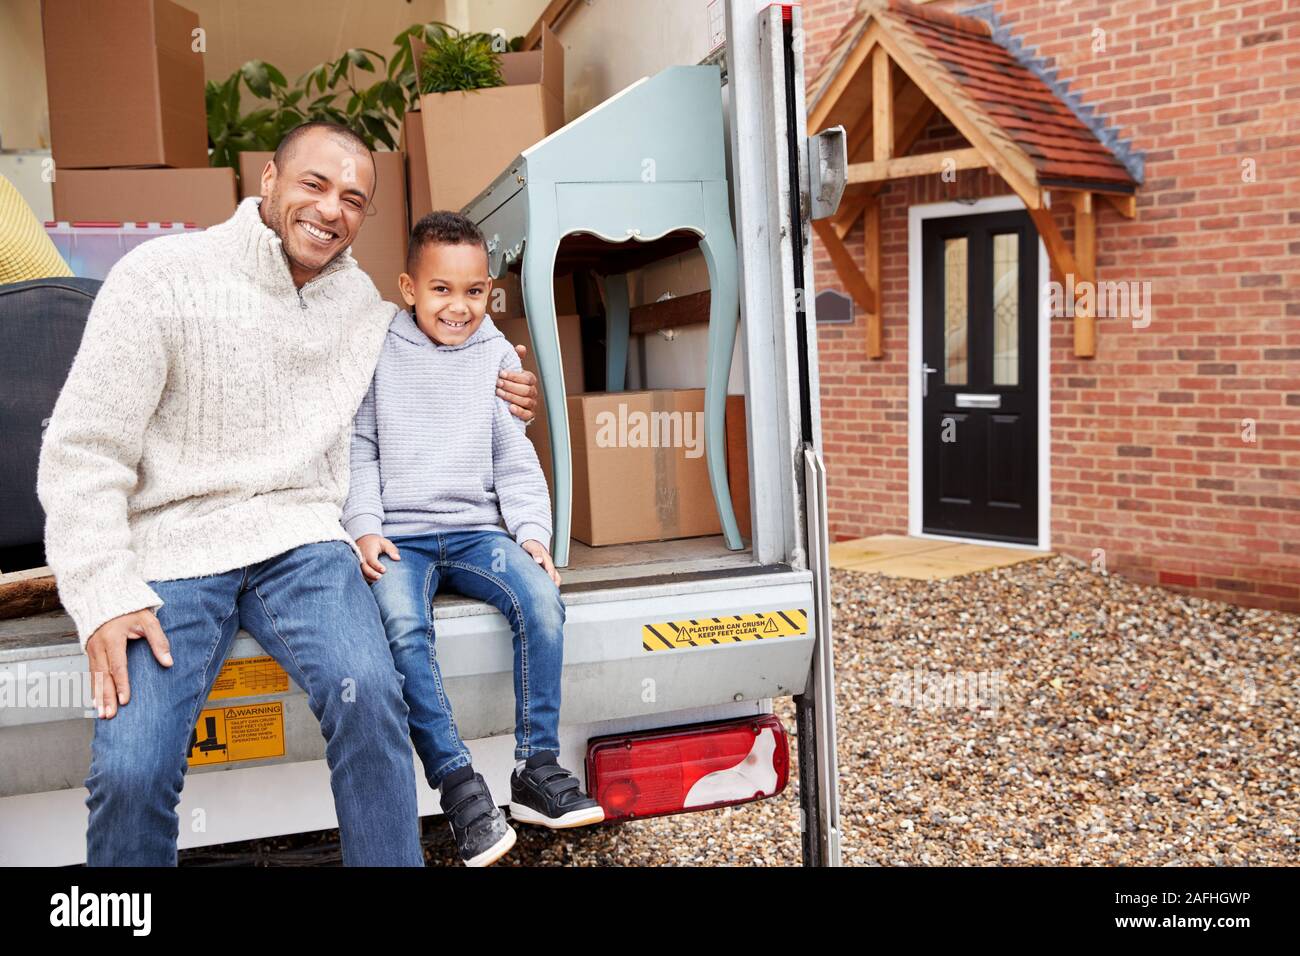 Portrait Of Father And Son Unloading Furniture From Removal Truck Into New Home Stock Photo